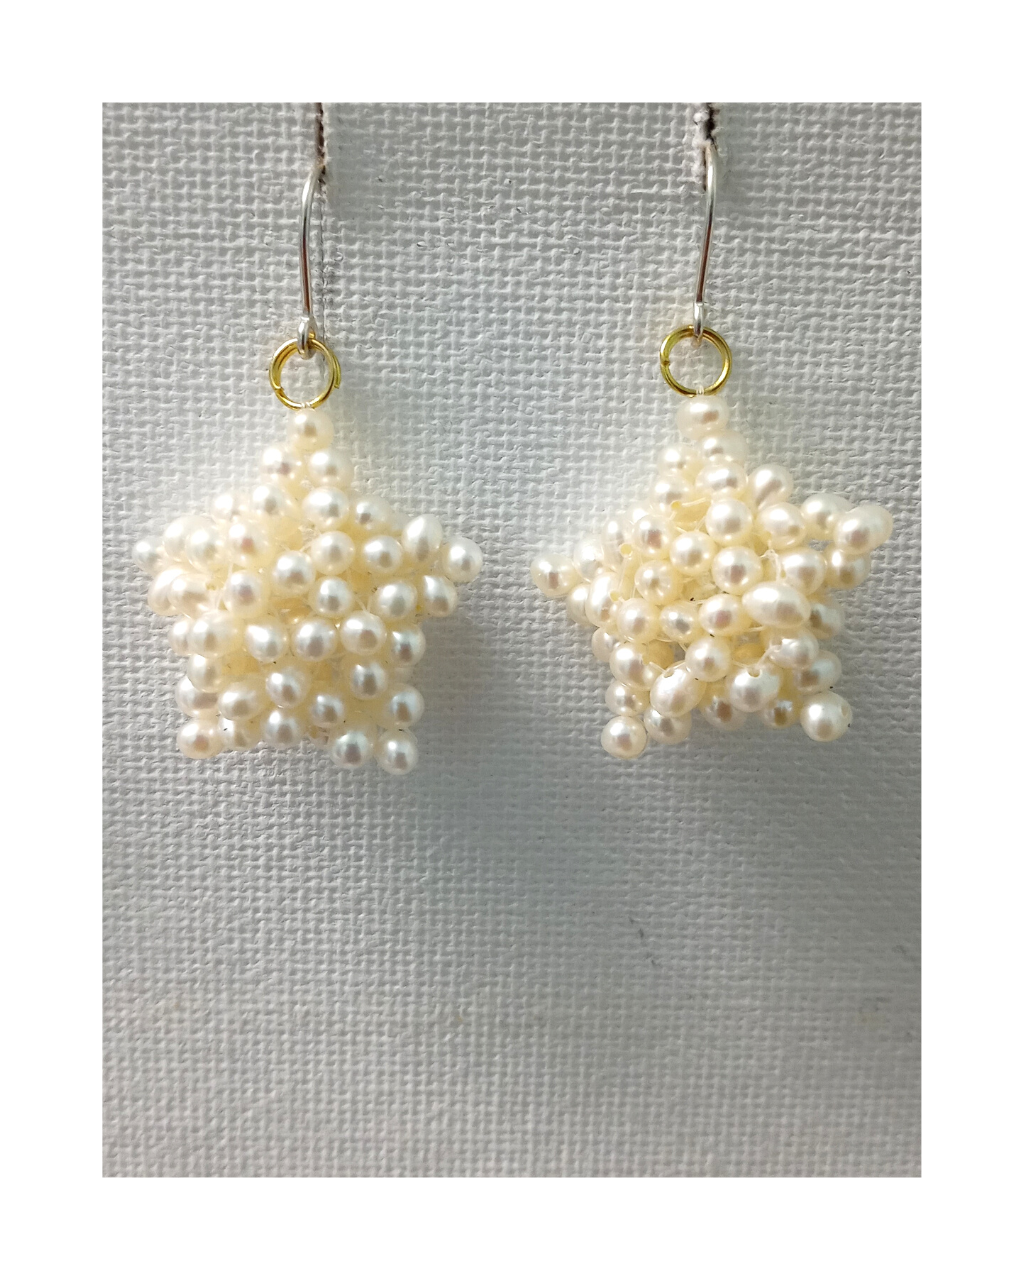 Amazing Luscious Woven White Pearl Star Design with Goldfilled Jump Ring Connected to Sterling Earrings 1 11/16"L X 1"W ONE ONLY